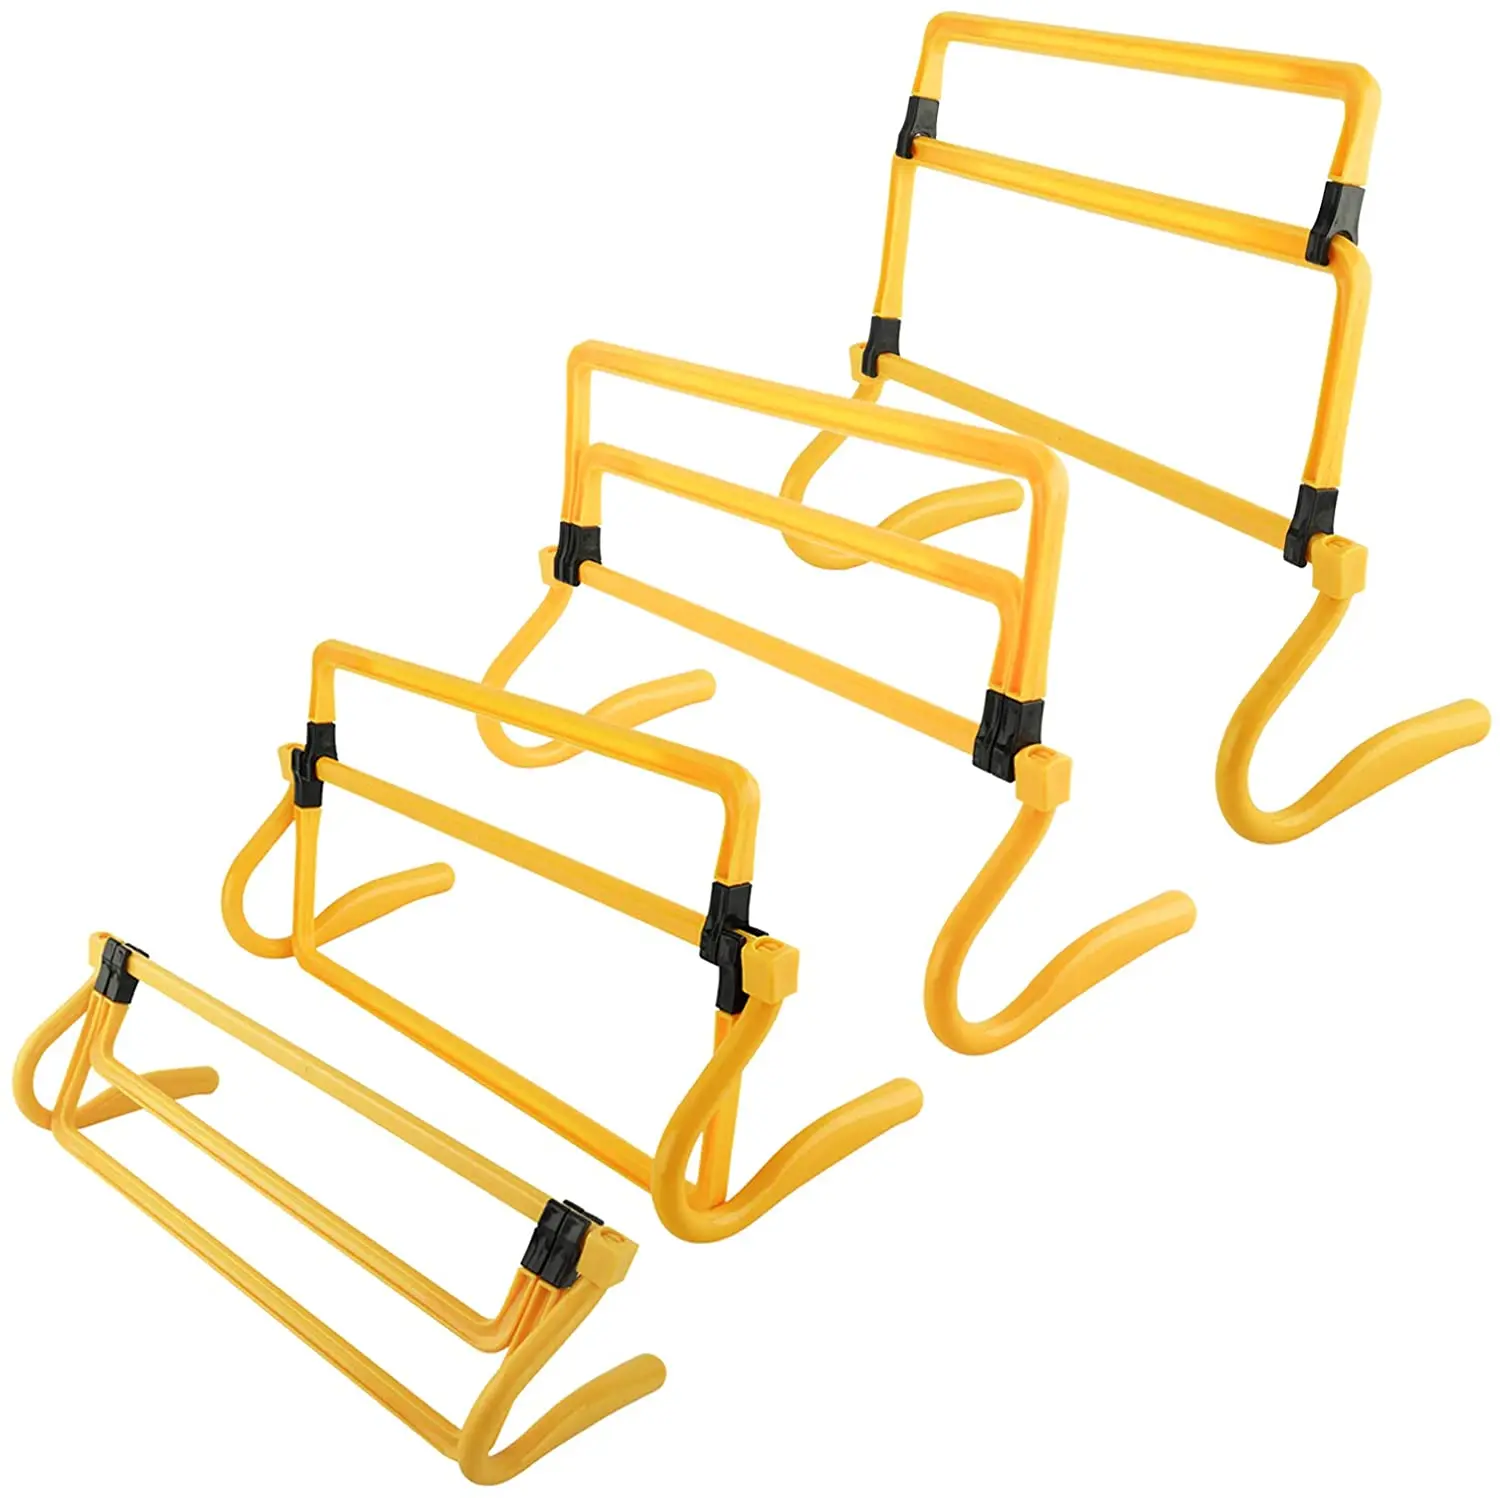 

Adjustable Hurdle Set for Agility Speed Training, Foldable for Jumping, Racing, Obstacle Courses,Soccer,Track & Field, Orange, yellow, blue, red,etc